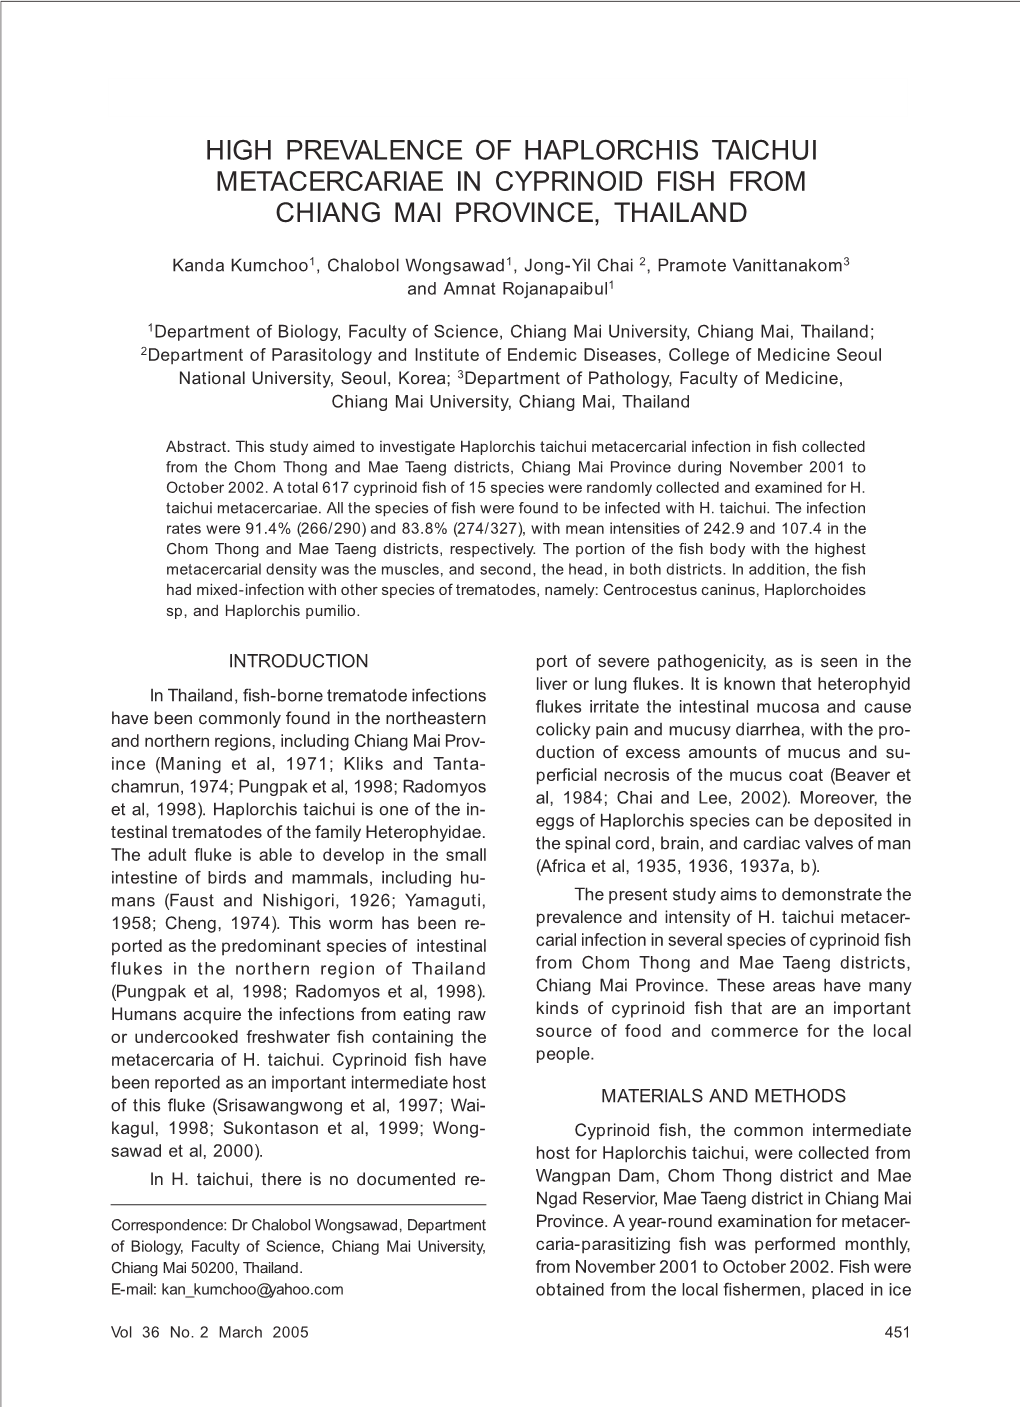 High Prevalence of Haplorchis Taichui Metacercariae in Cyprinoid Fish from Chiang Mai Province, Thailand